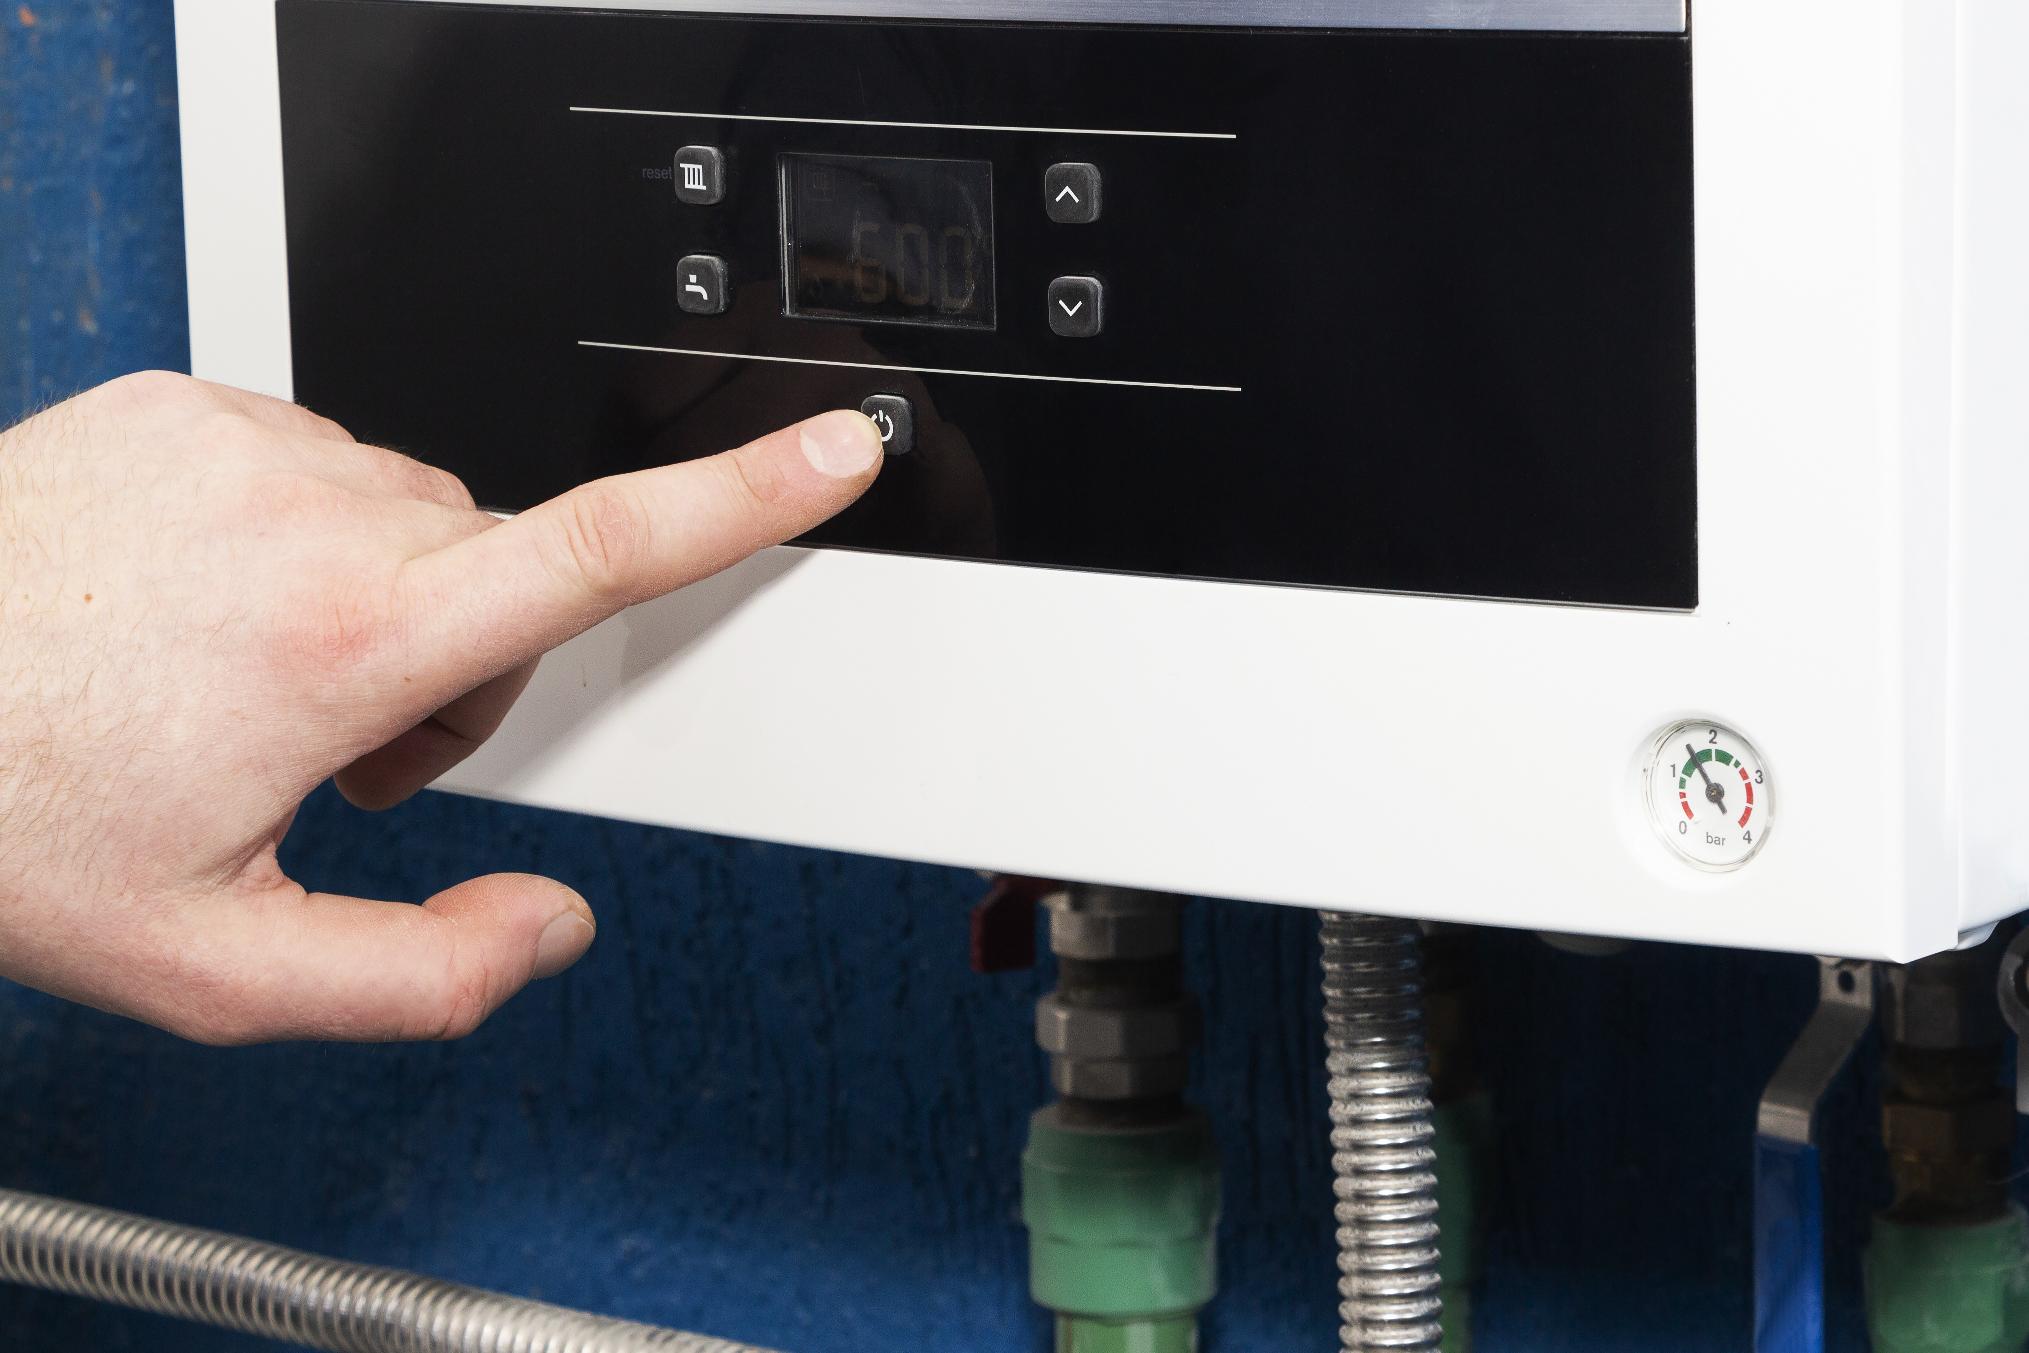 Is turning off the boiler during your Christmas vacation the right choice?